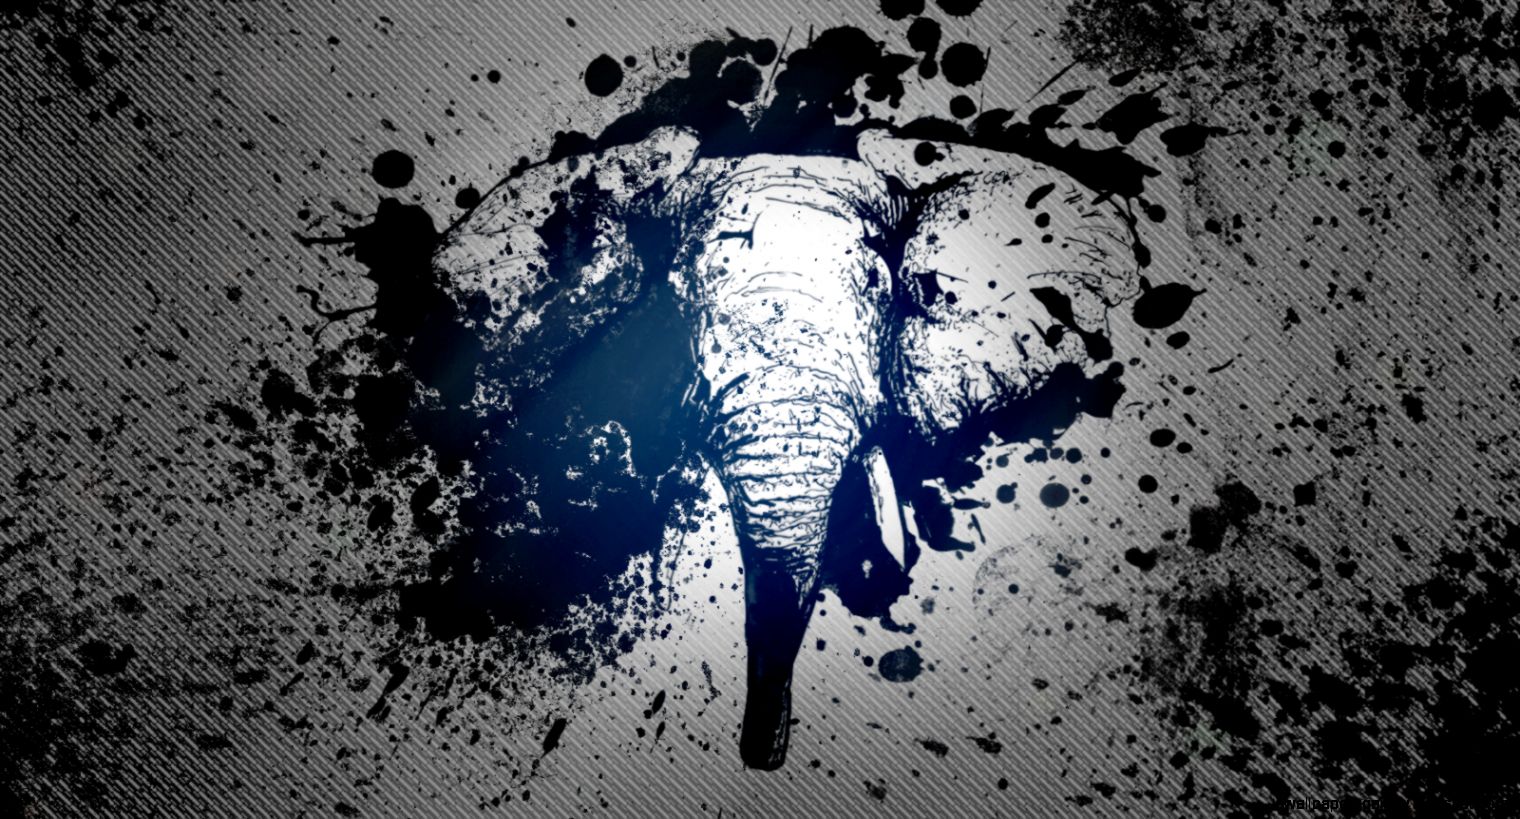 elephant tumblr wallpapers Wallpaper Elephant Wallpapers Tumblr Gallery